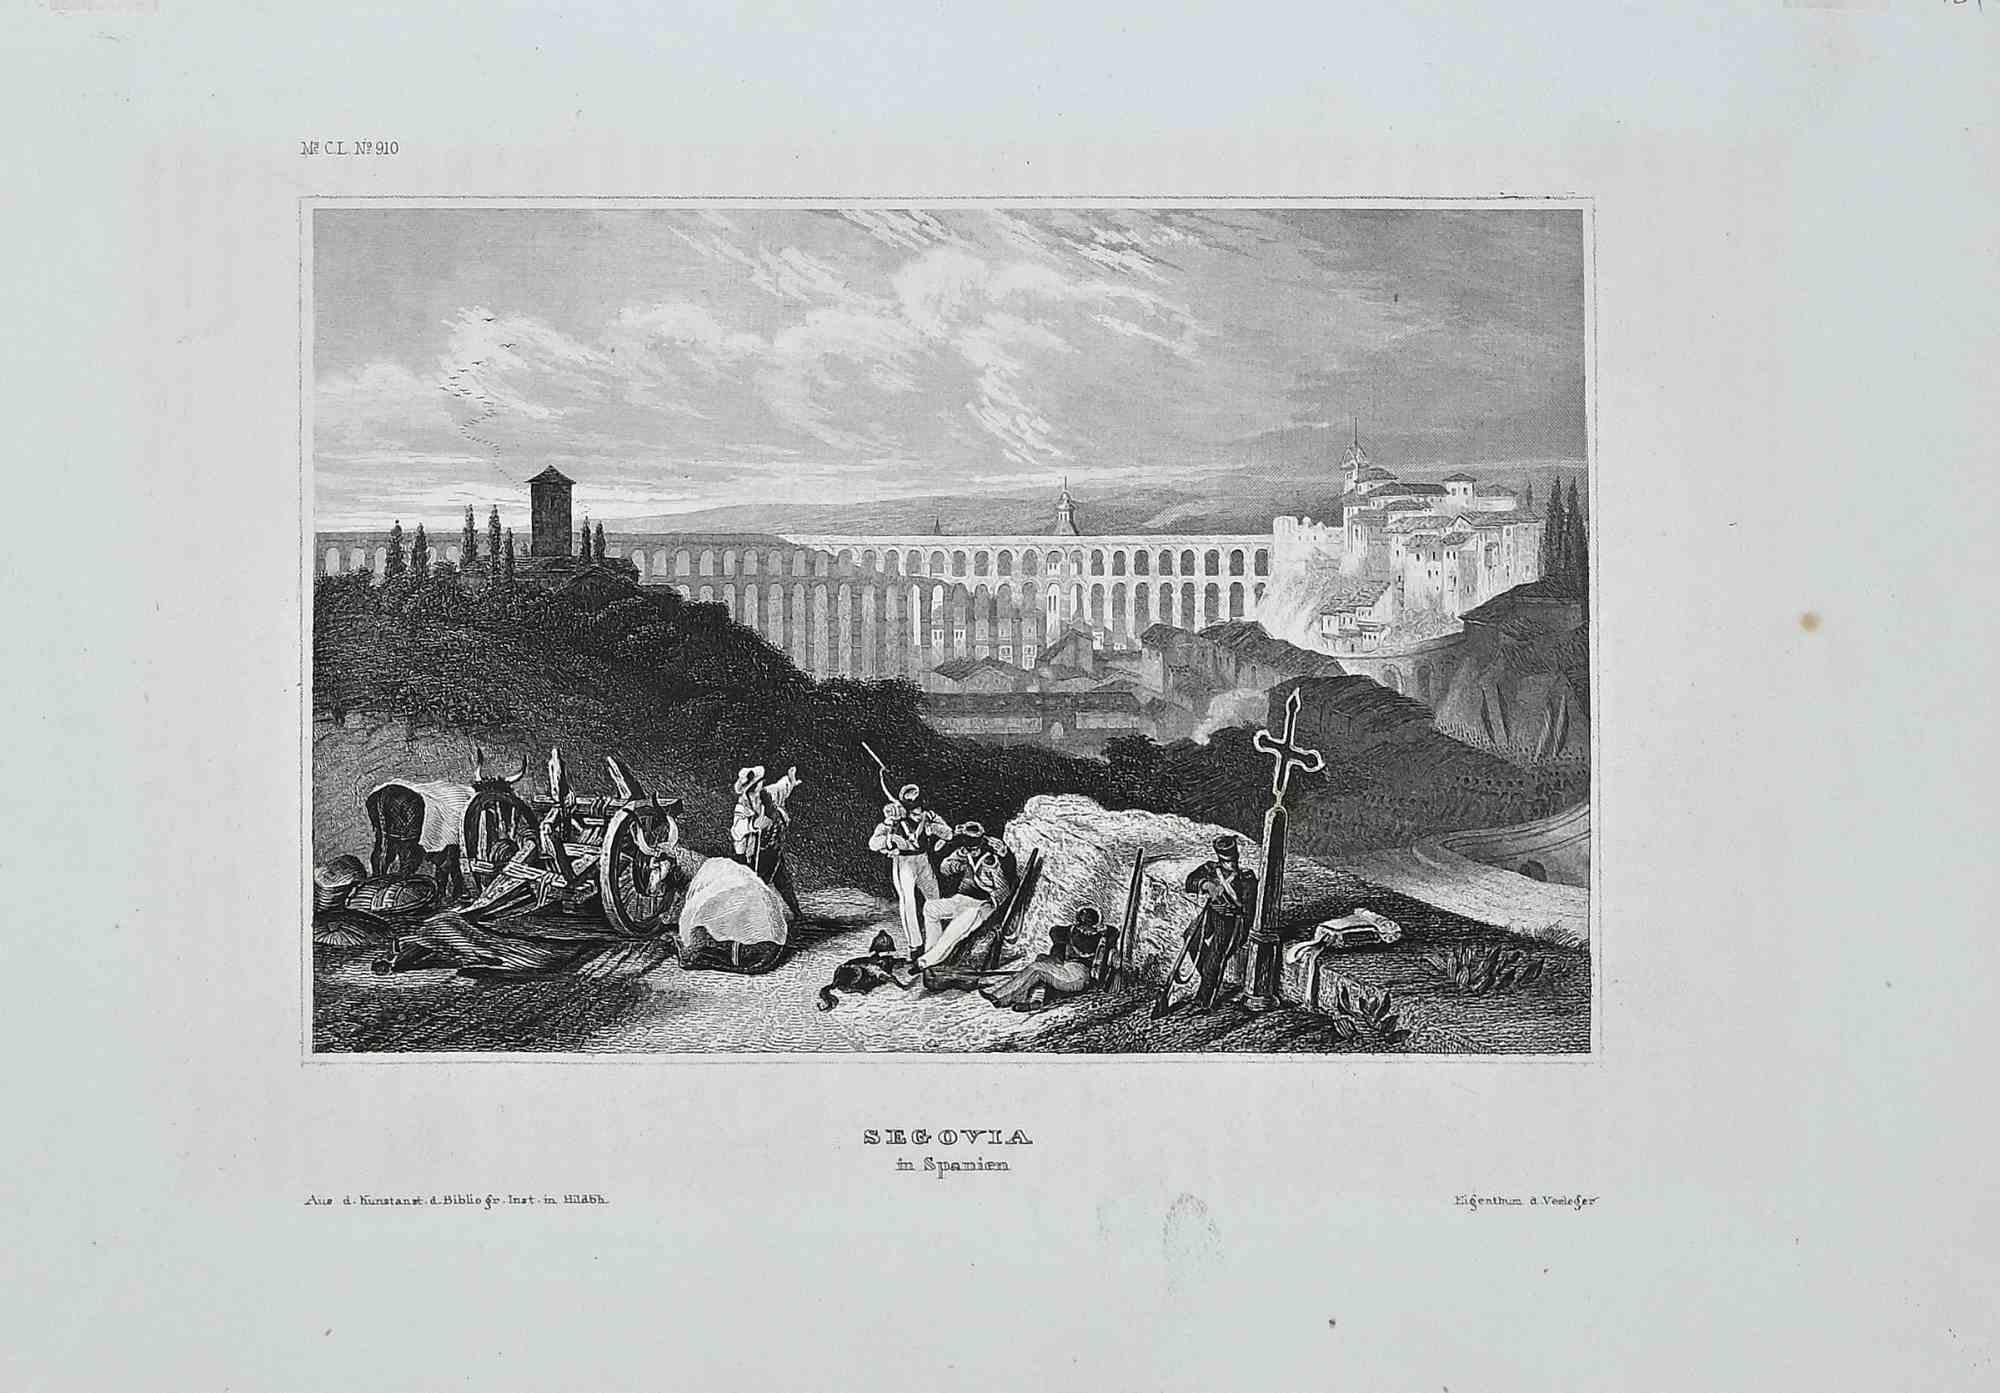 Ancient View of Segovia in Spain  is an original lithograph on paper realized by Eigenthum d. Verleger in The 19th Century.

Signed on the plate on the lower right corner.

Original lithograph on paper. 

Titled on the lower center.

Passepartout